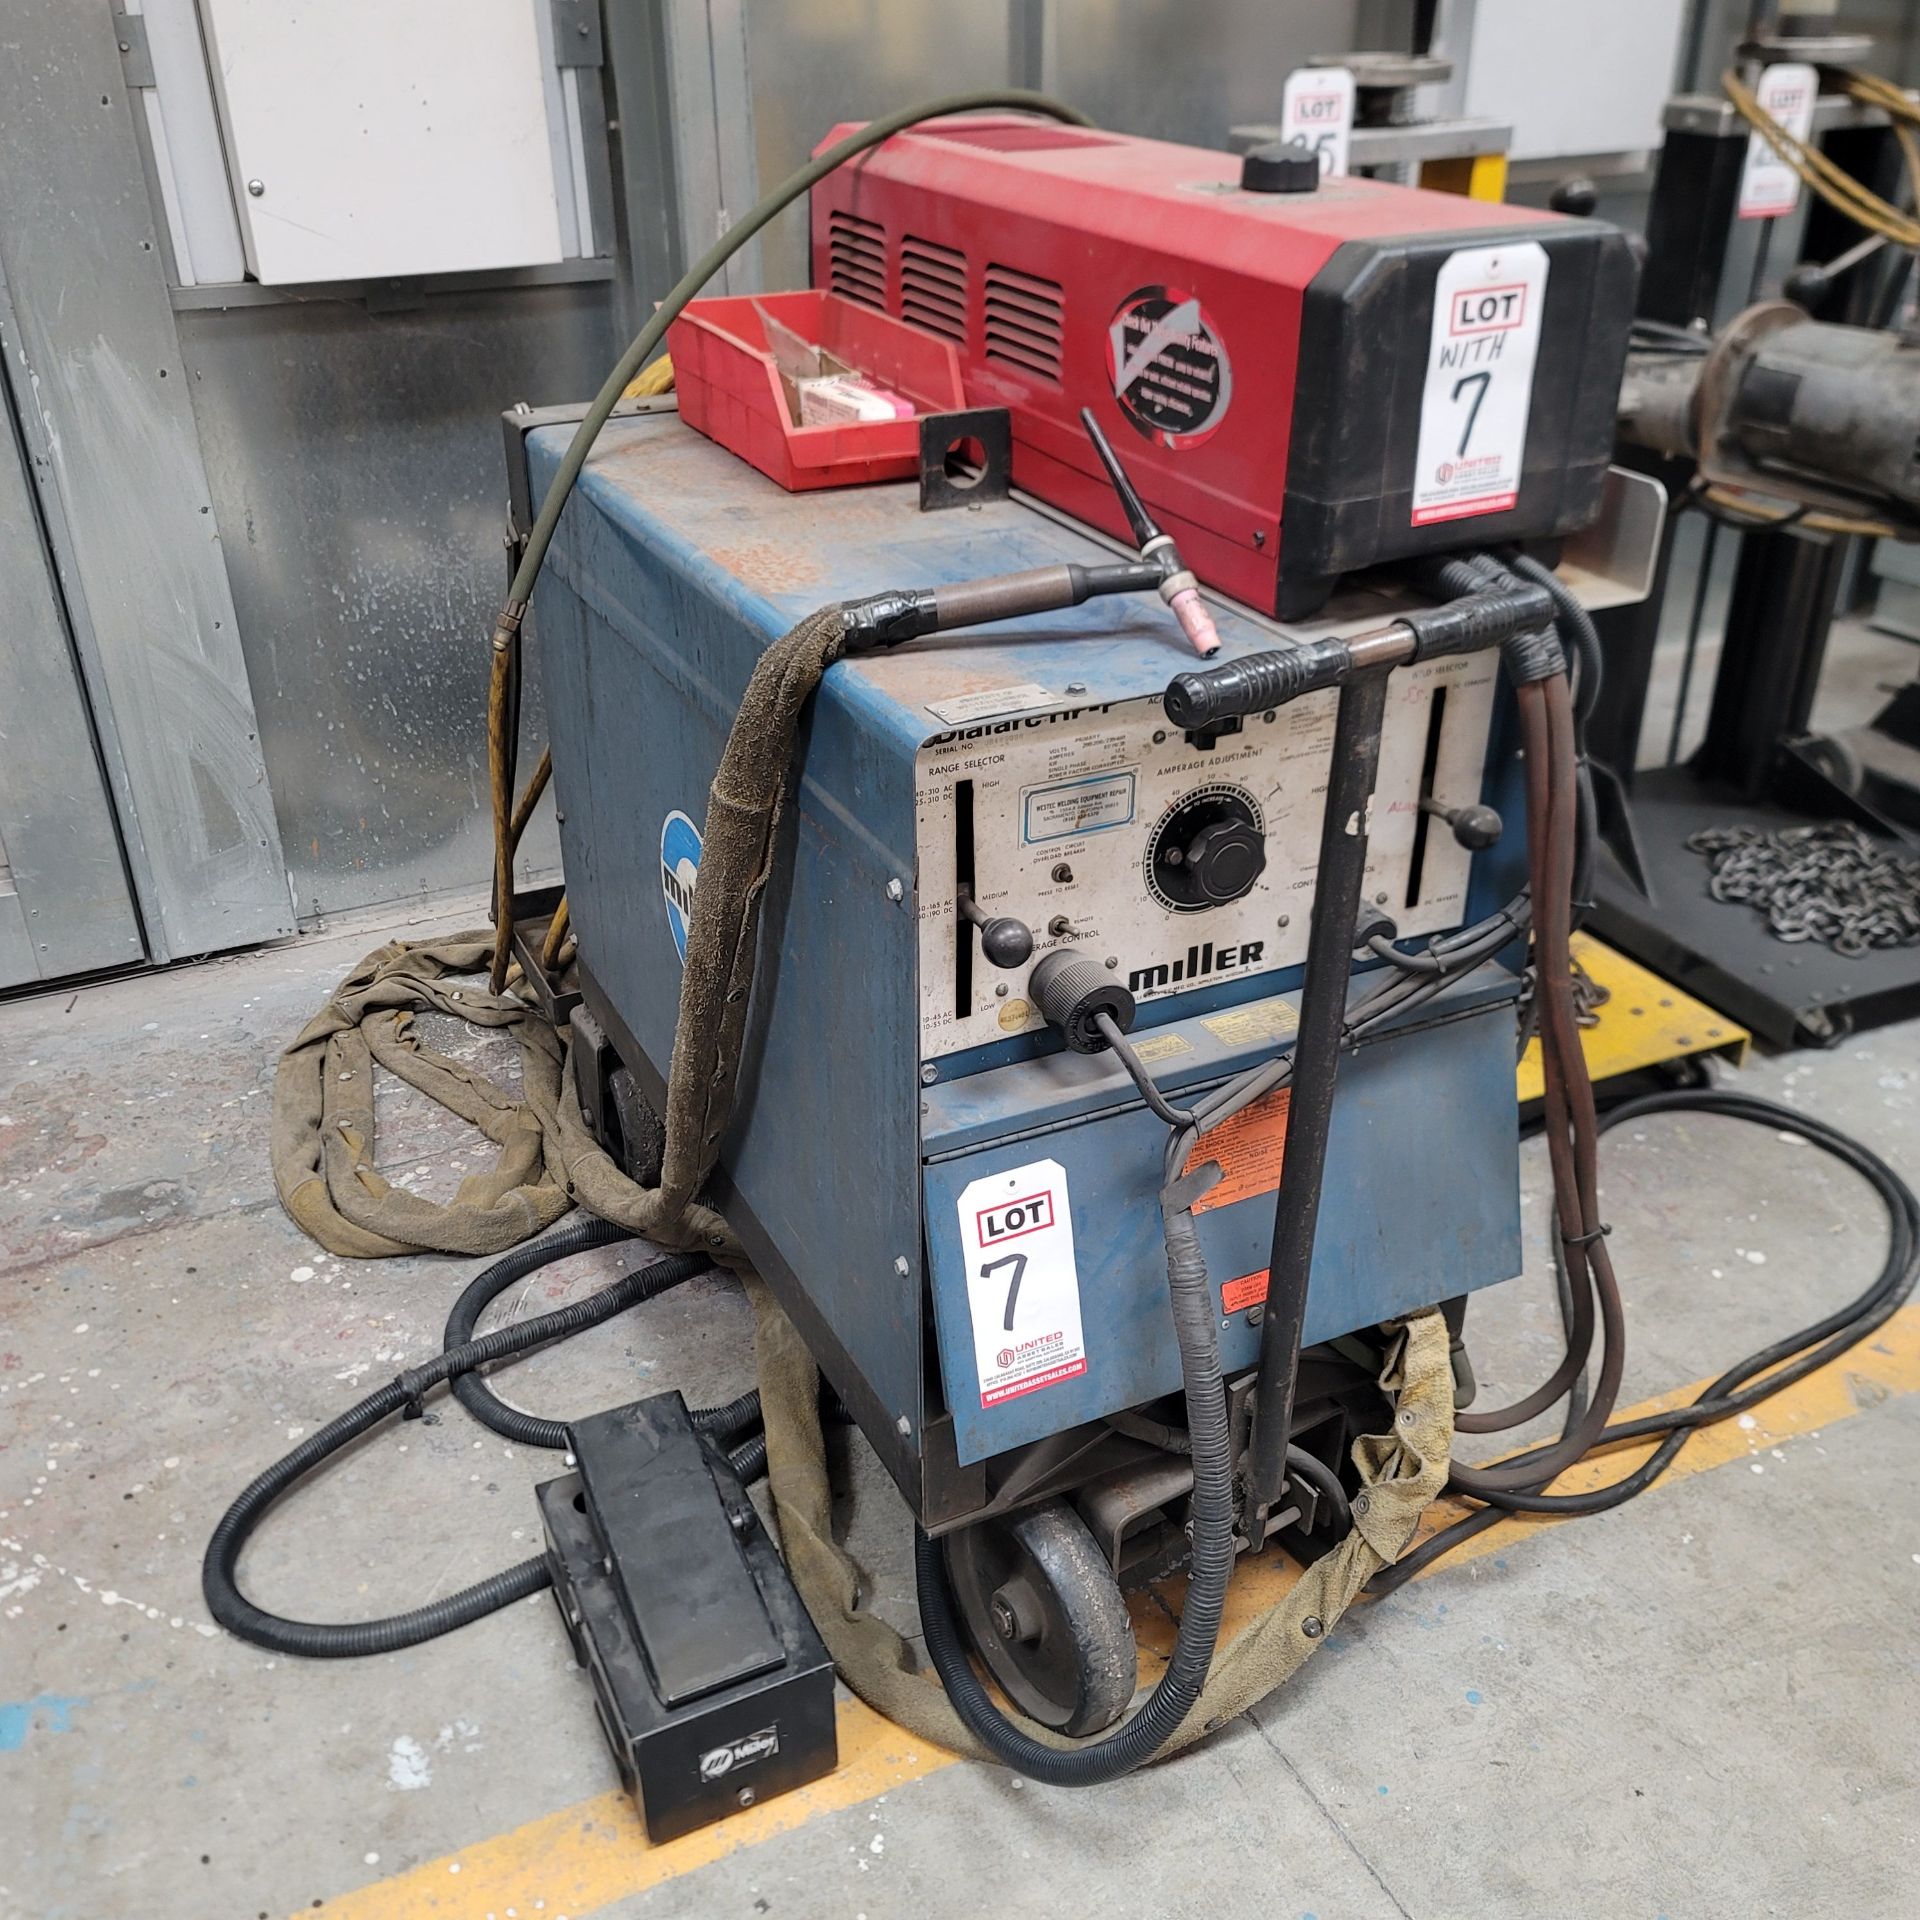 MILLER DIALARC HF-P WELDING POWER SOURCE, W/ LINCOLN ELECTRIC COOL-ARC 40 WATER COOLER, S/N